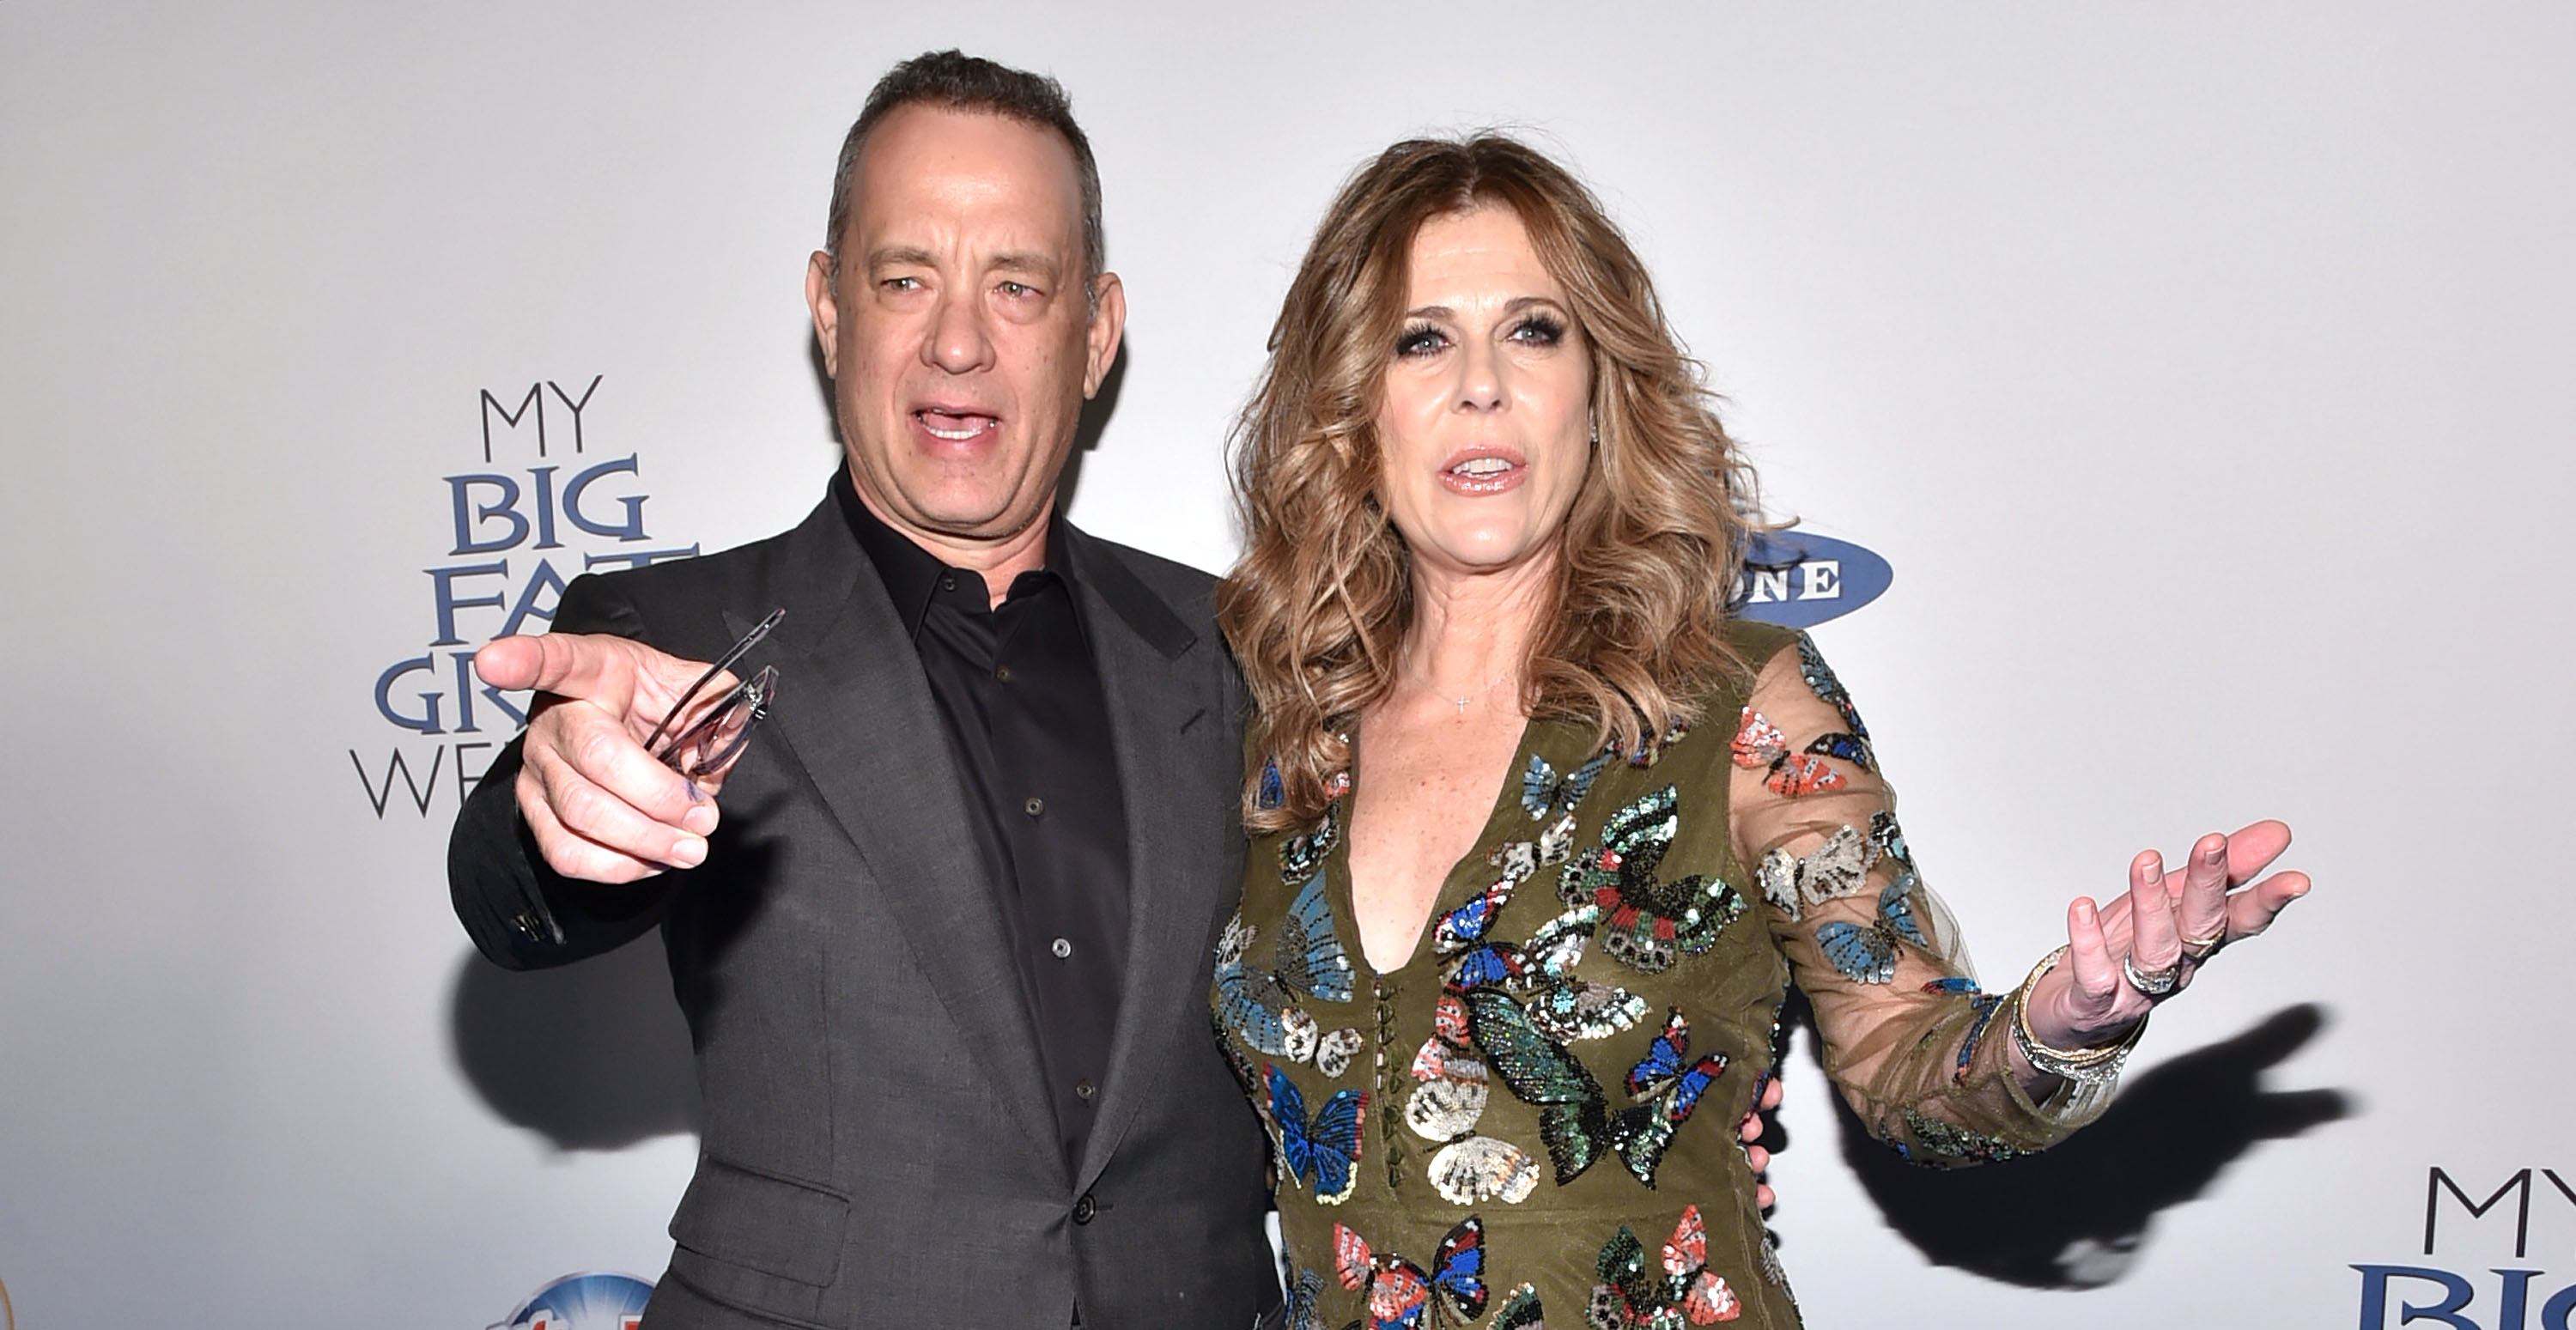 Tom Hanks and Rita Wilson at the premiere of "My Big Fat Greek Wedding 2" in New York City on March 15, 2016 | Source: Getty Images